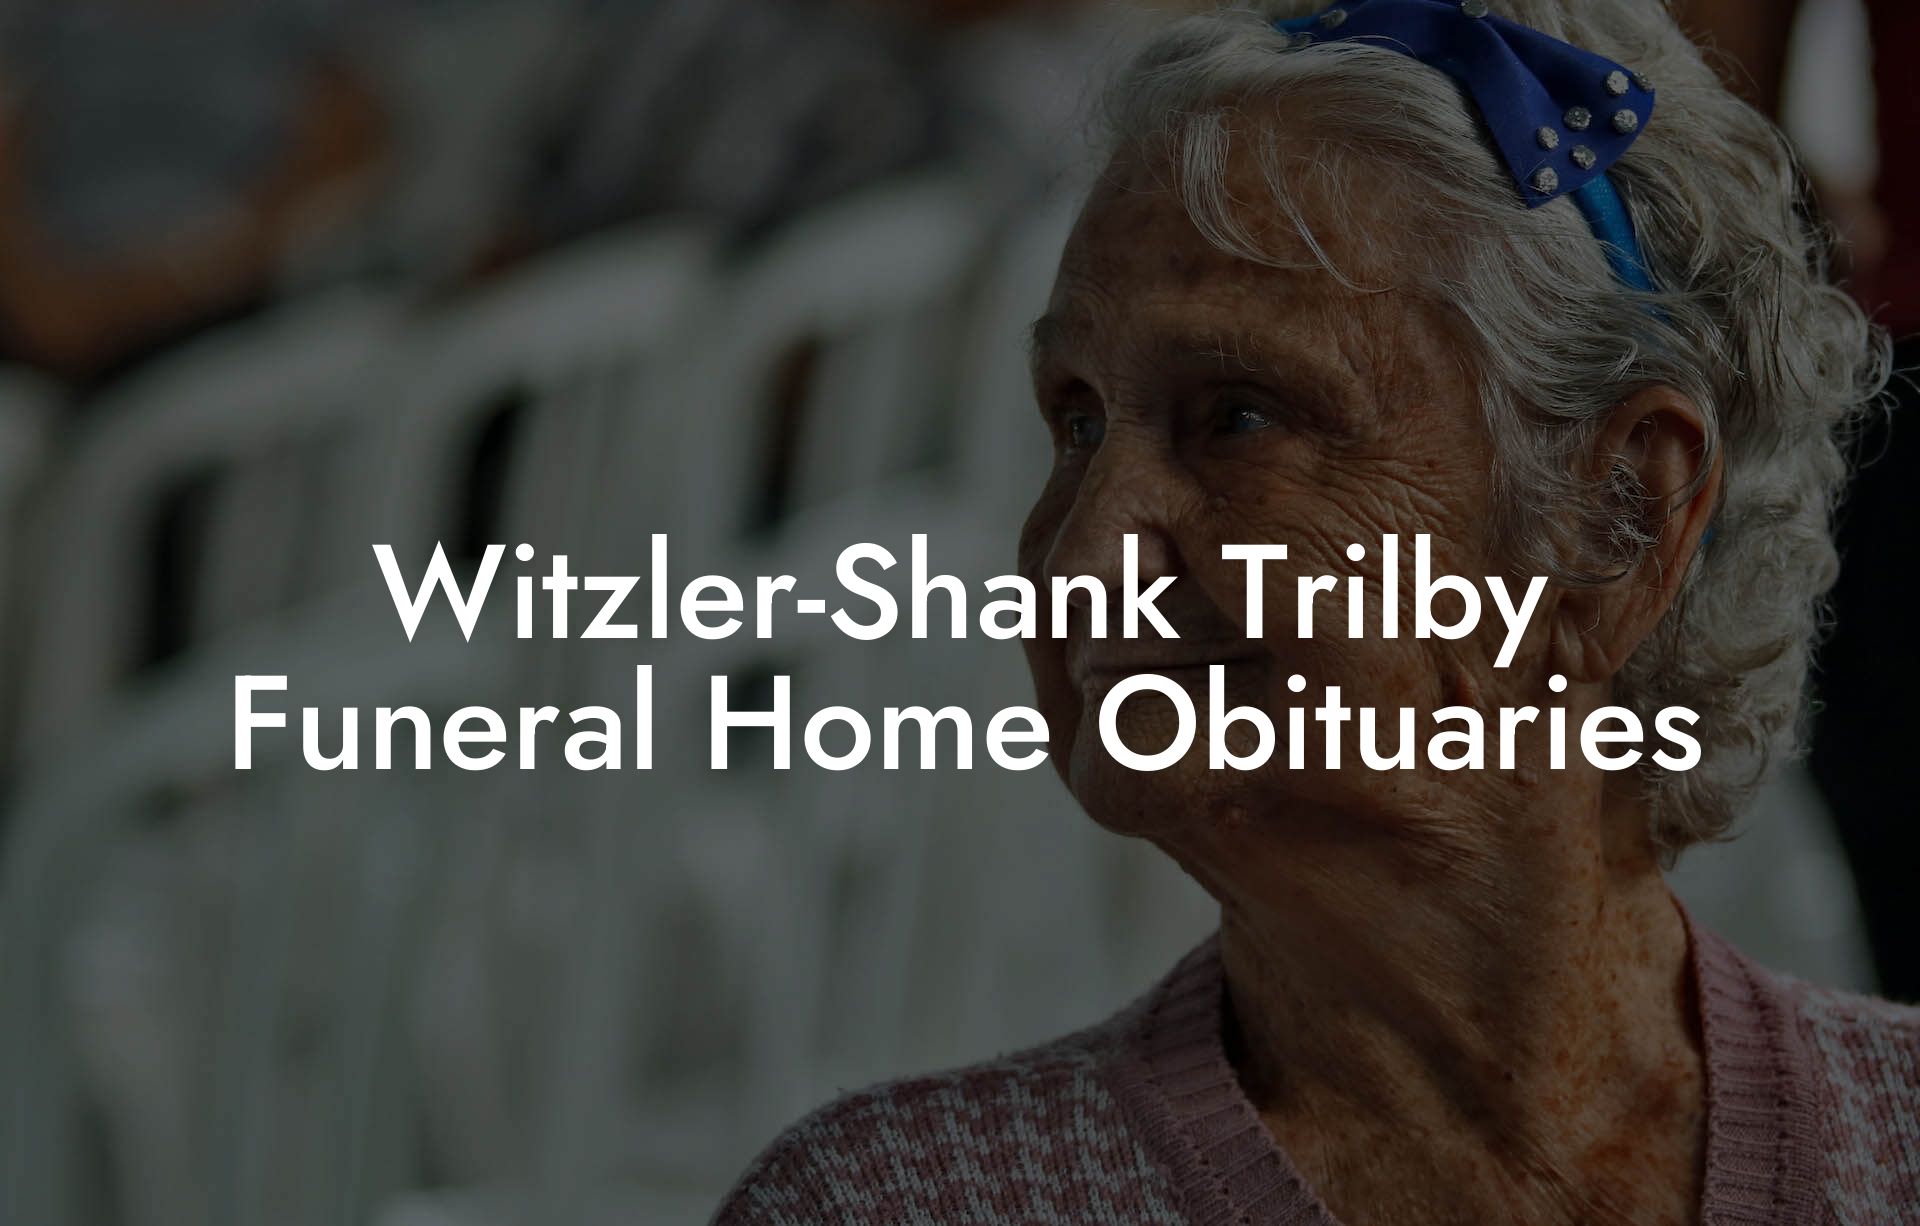 Witzler-Shank Trilby Funeral Home Obituaries